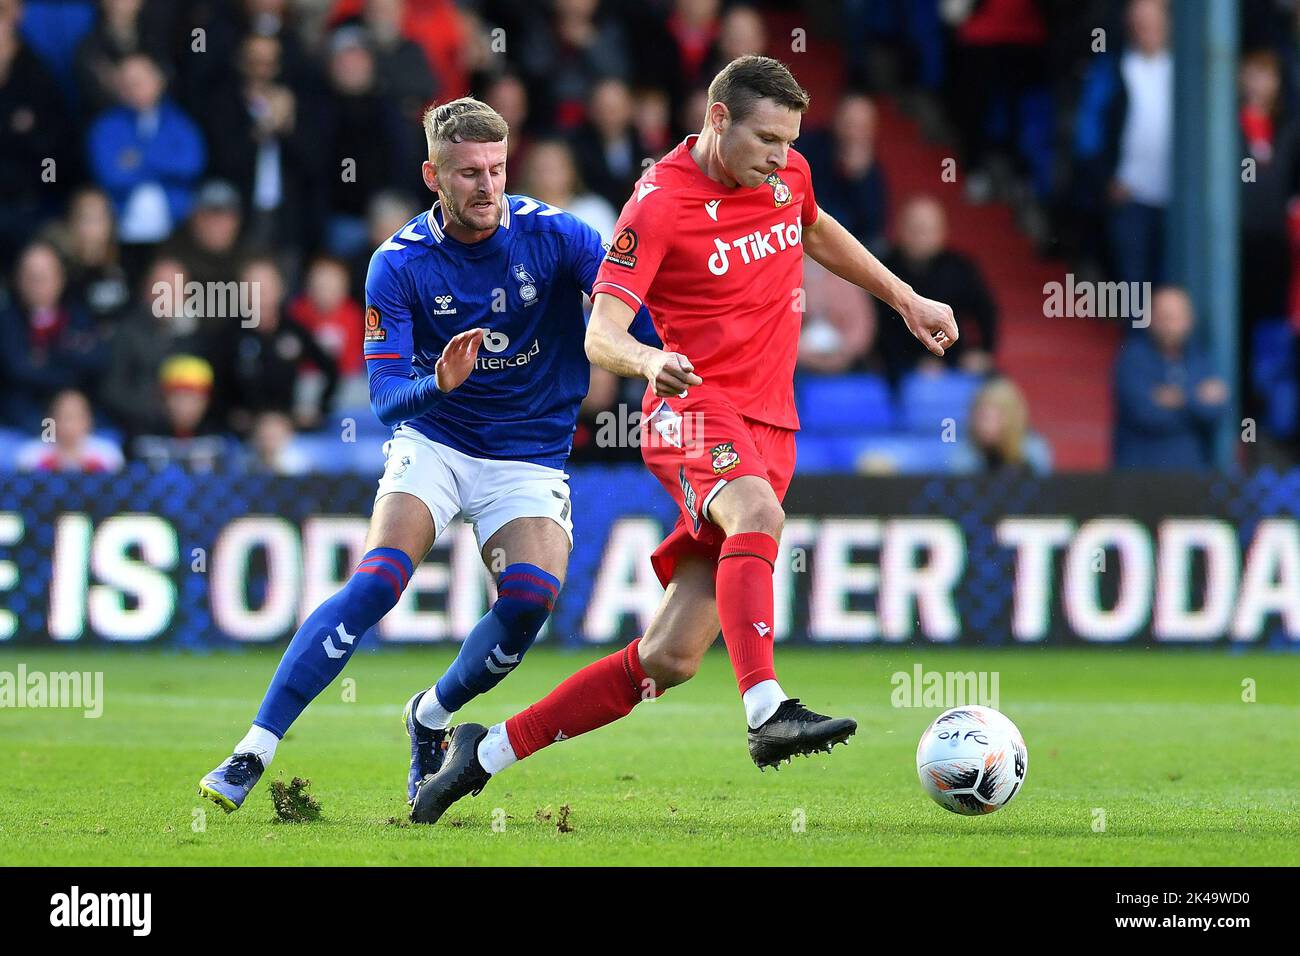 Oldham, UK. 1st October 2022during the Vanarama National League match between Oldham Athletic and Wrexham at Boundary Park, Oldham on Saturday 1st October 2022Jack Stobbs of Oldham Athletic tussles with Paul Mullin of Wrexham Football Club during the Vanarama National League match between Oldham Athletic and Wrexham at Boundary Park, Oldham on Saturday 1st October 2022. Credit: MI News & Sport /Alamy Live News Stock Photo